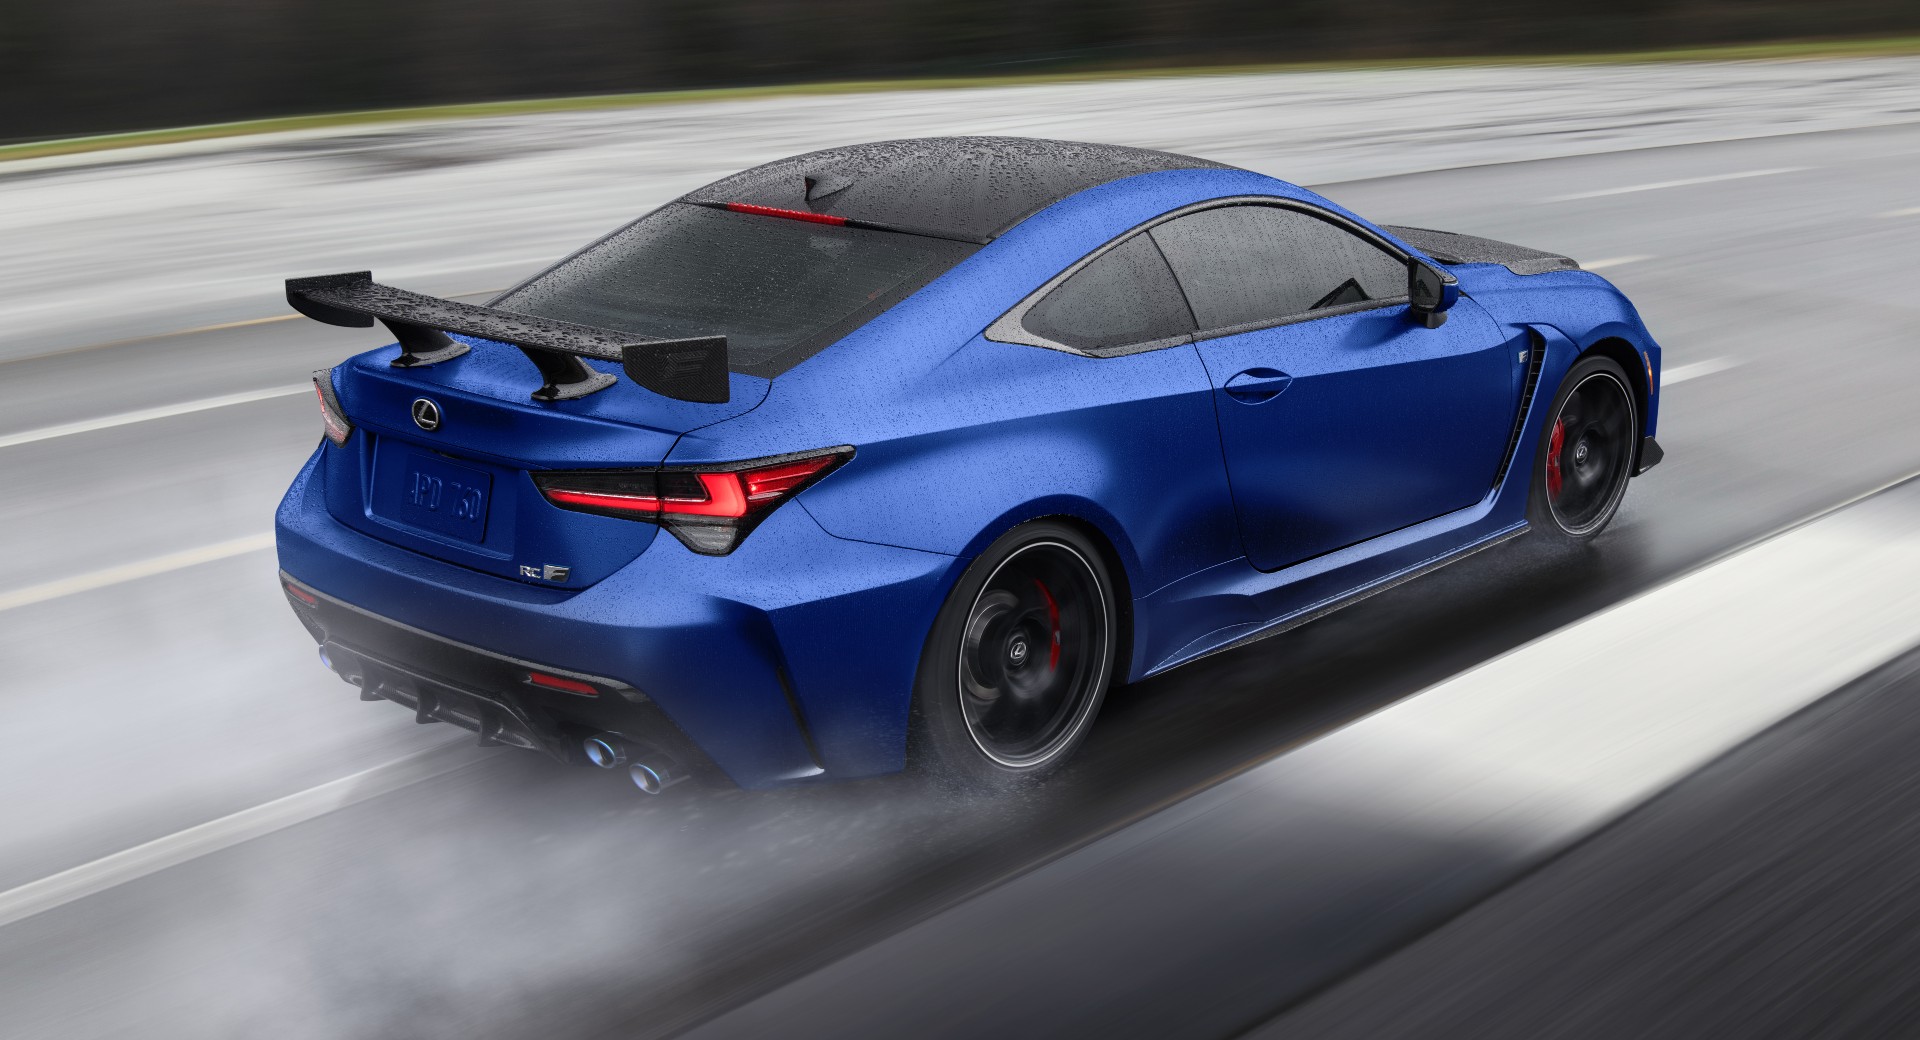 2022 Lexus RC F And RC F Fuji Speedway Edition Revealed For The US